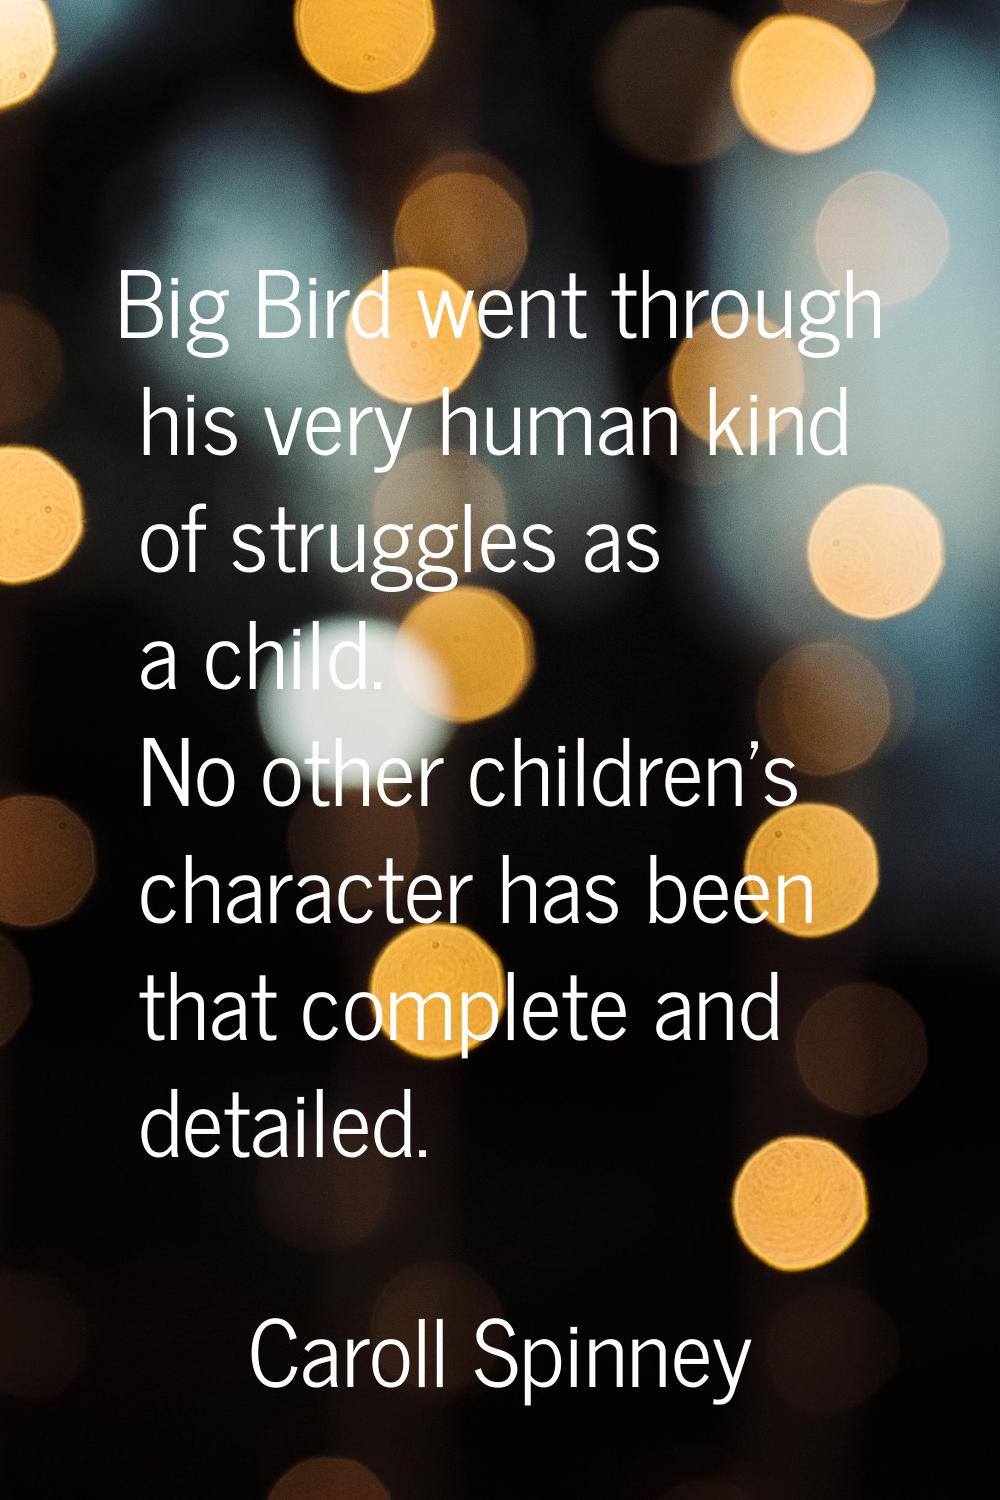 Big Bird went through his very human kind of struggles as a child. No other children's character ha